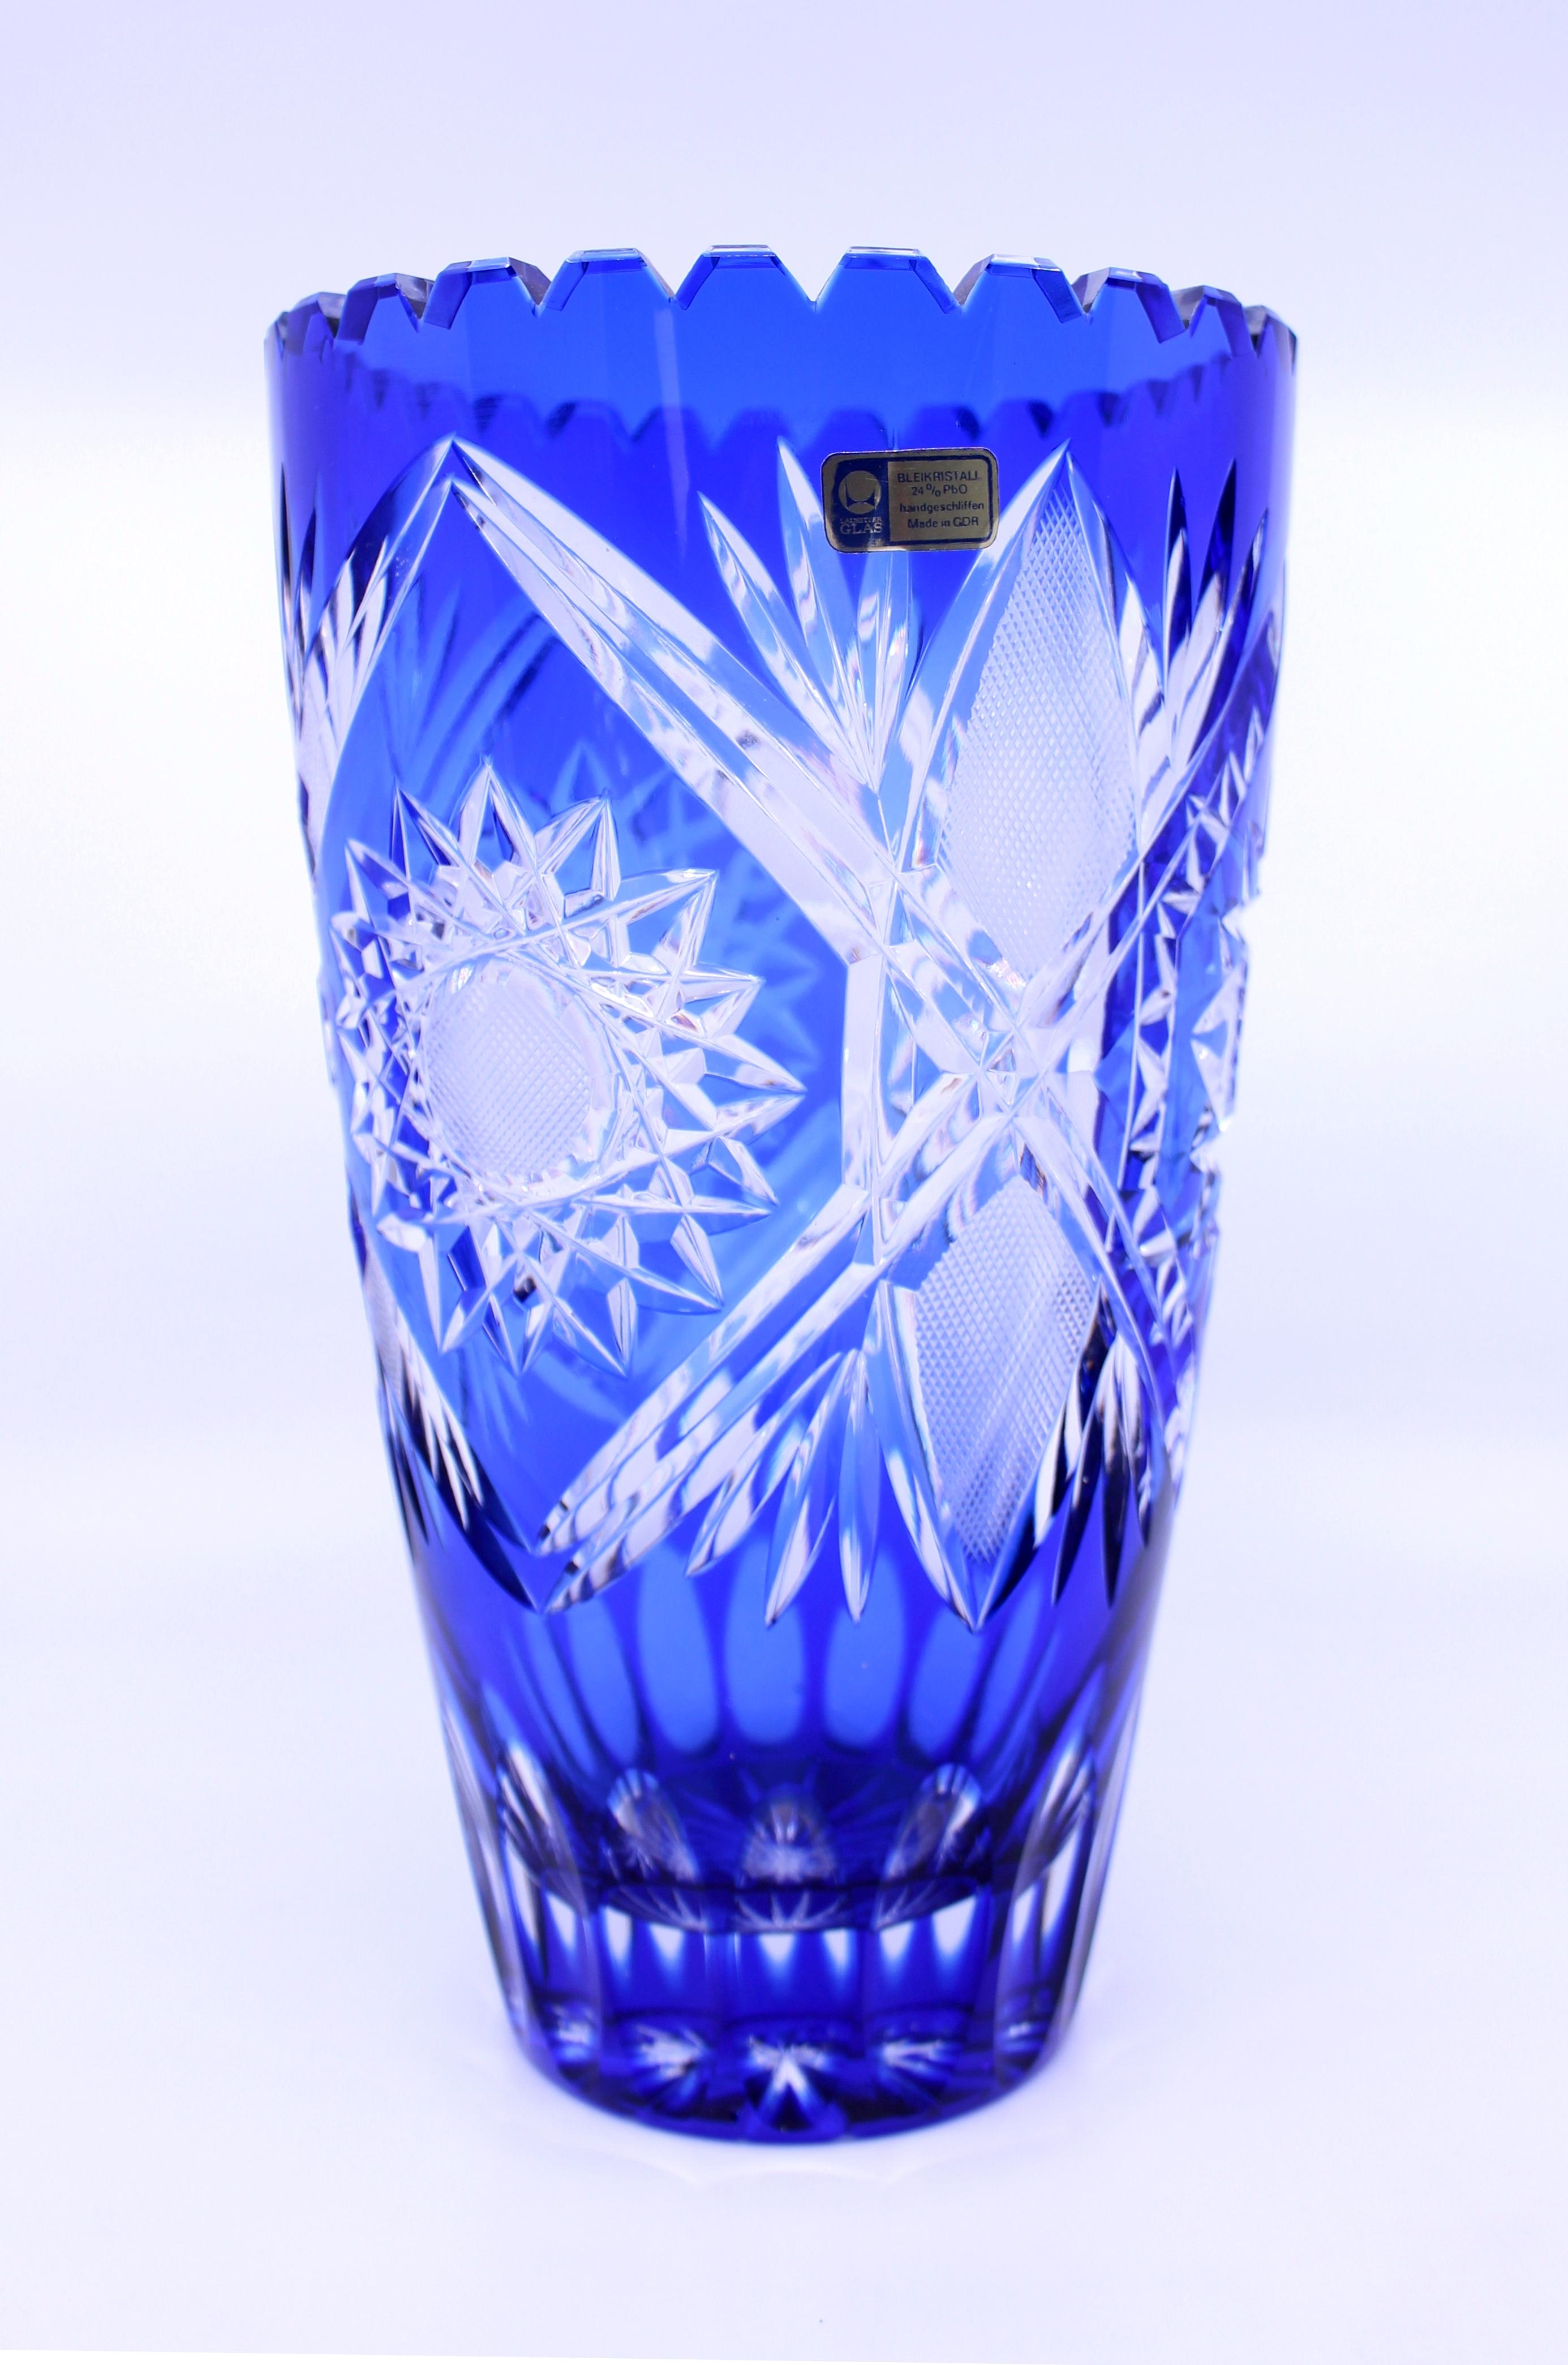 Period:
Mid-late 20th century

Origin: 
German

Composition: 
Cut overlay crystal, blue

Condition: 
Very good condition commensurate with age. No chips, cracks or repairs. Light scratches to base commensurate with age
 

 

German